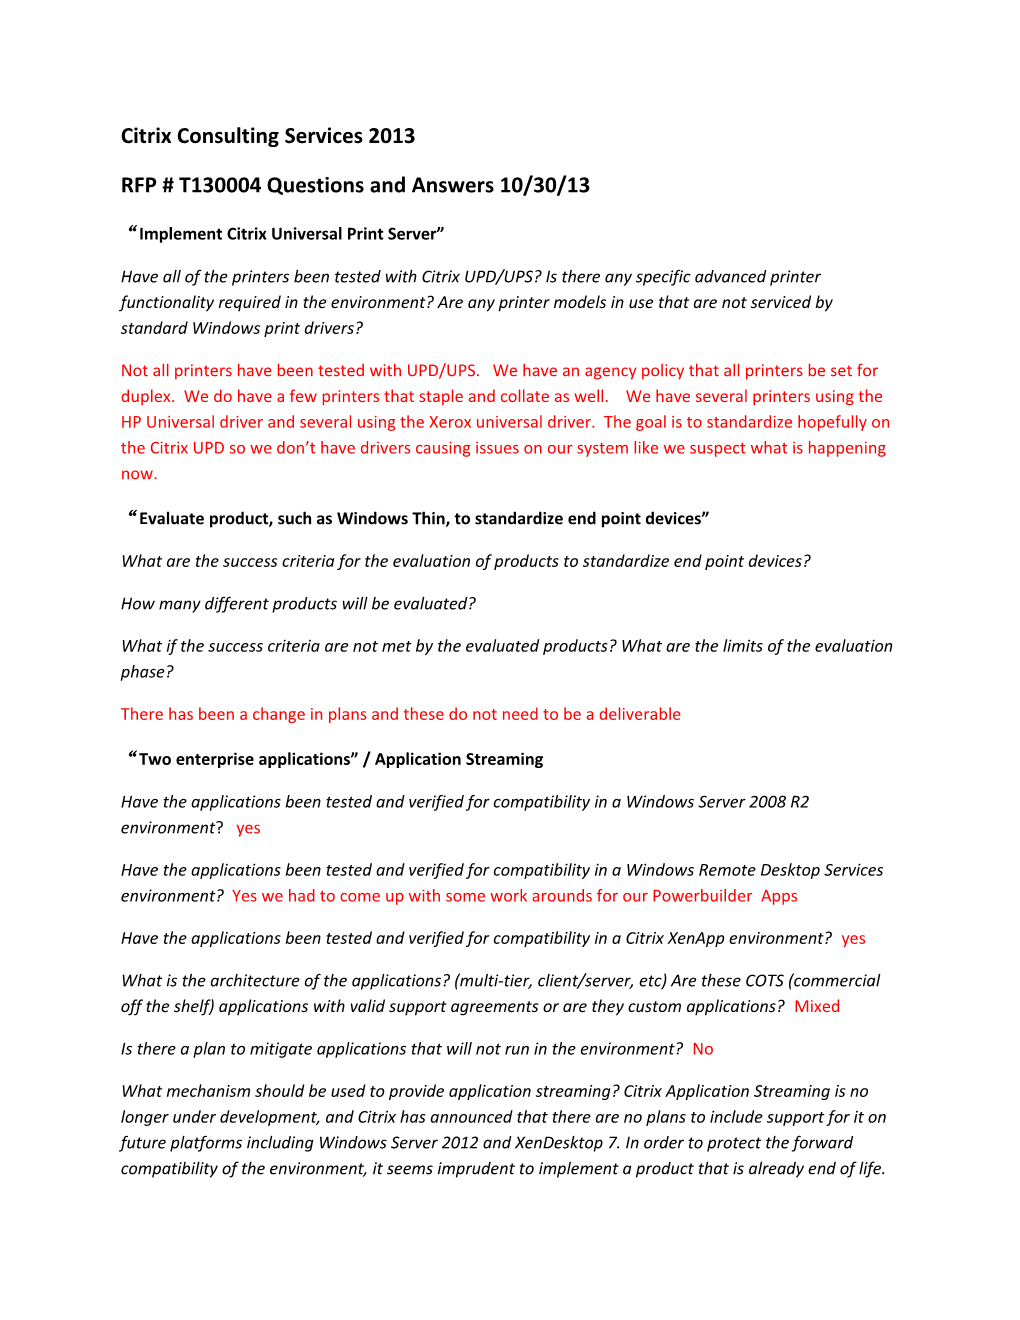 RFP # T130004 Questions and Answers 10/30/13